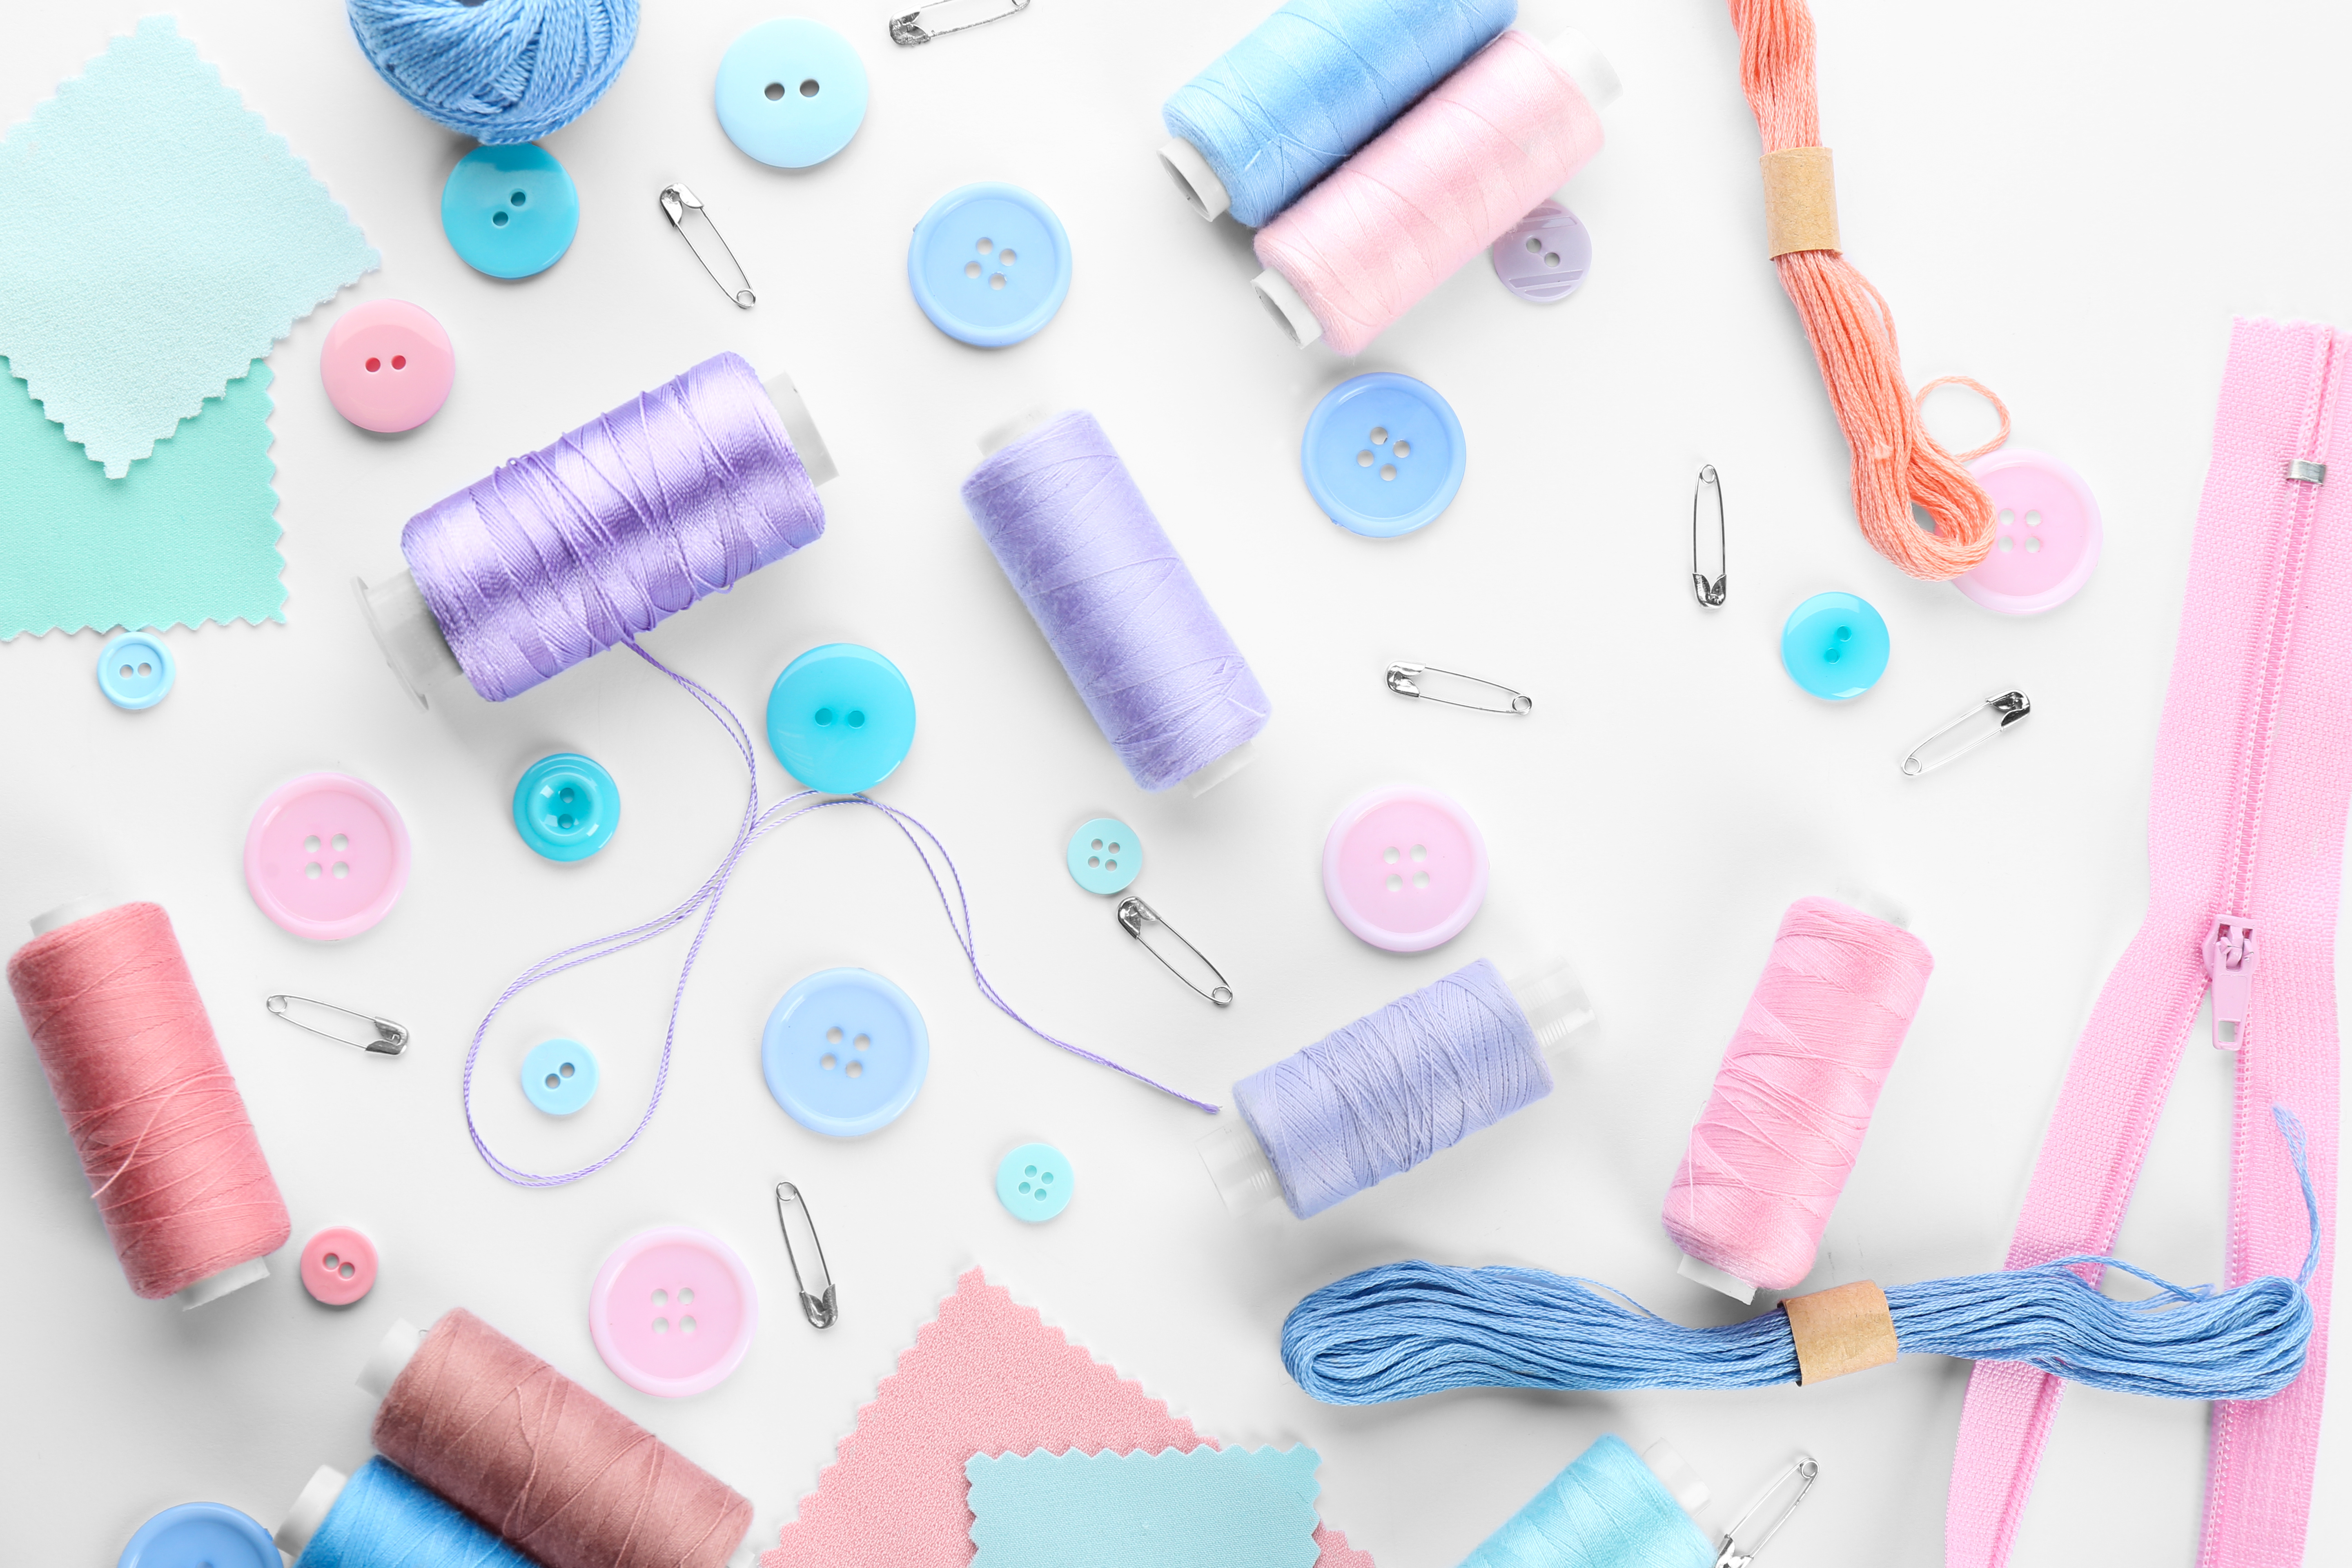 White background with pink, blue, and purple sewing items